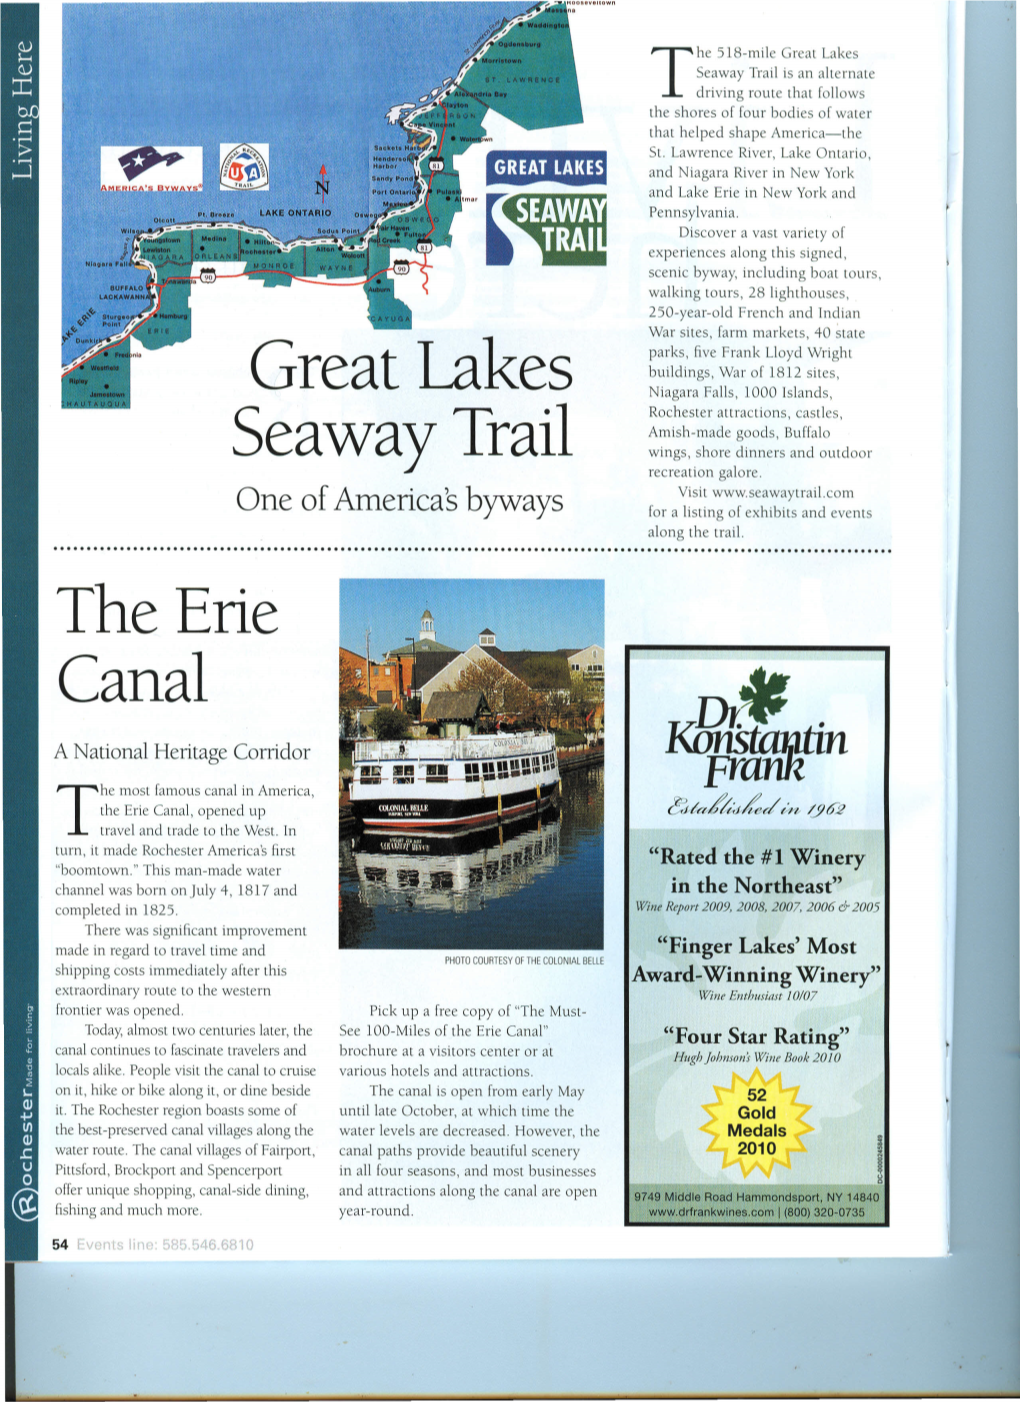 Great Lakes Seaway Trail Is an Alternate T Driving Route That Follows the Shores of Four Bodies of Water That Helped Shape America-The St